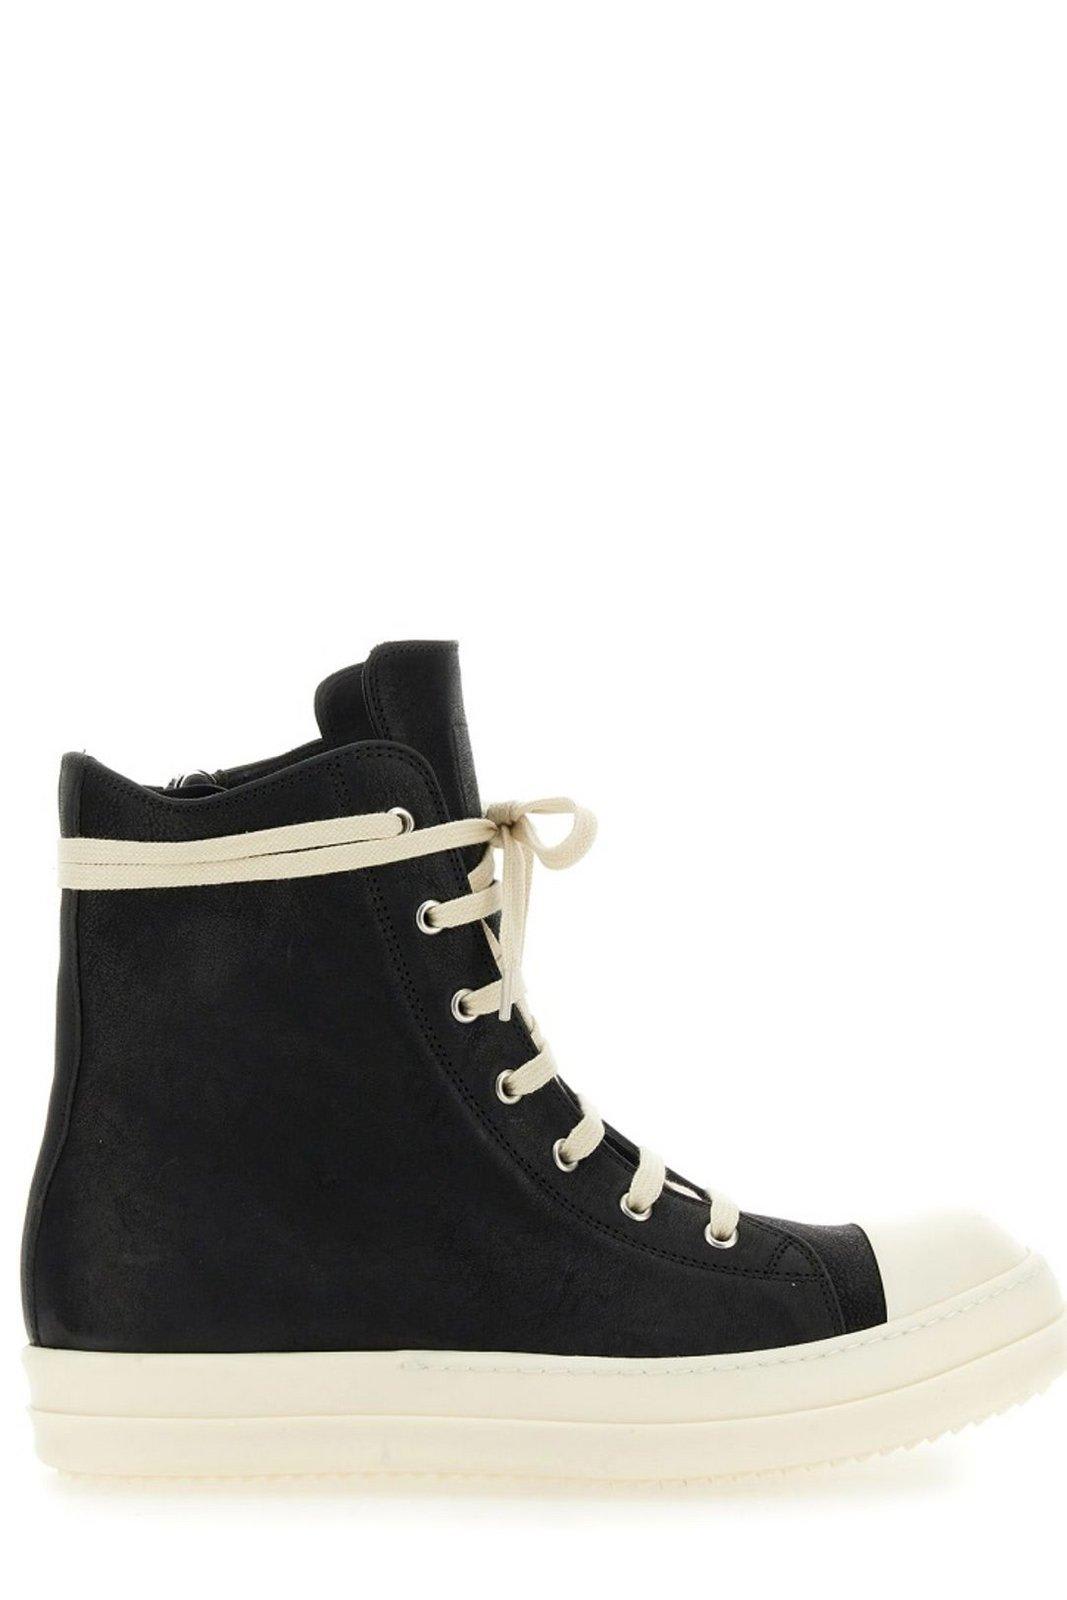 RICK OWENS ROUND-TOE HIGH-TOP SNEAKERS